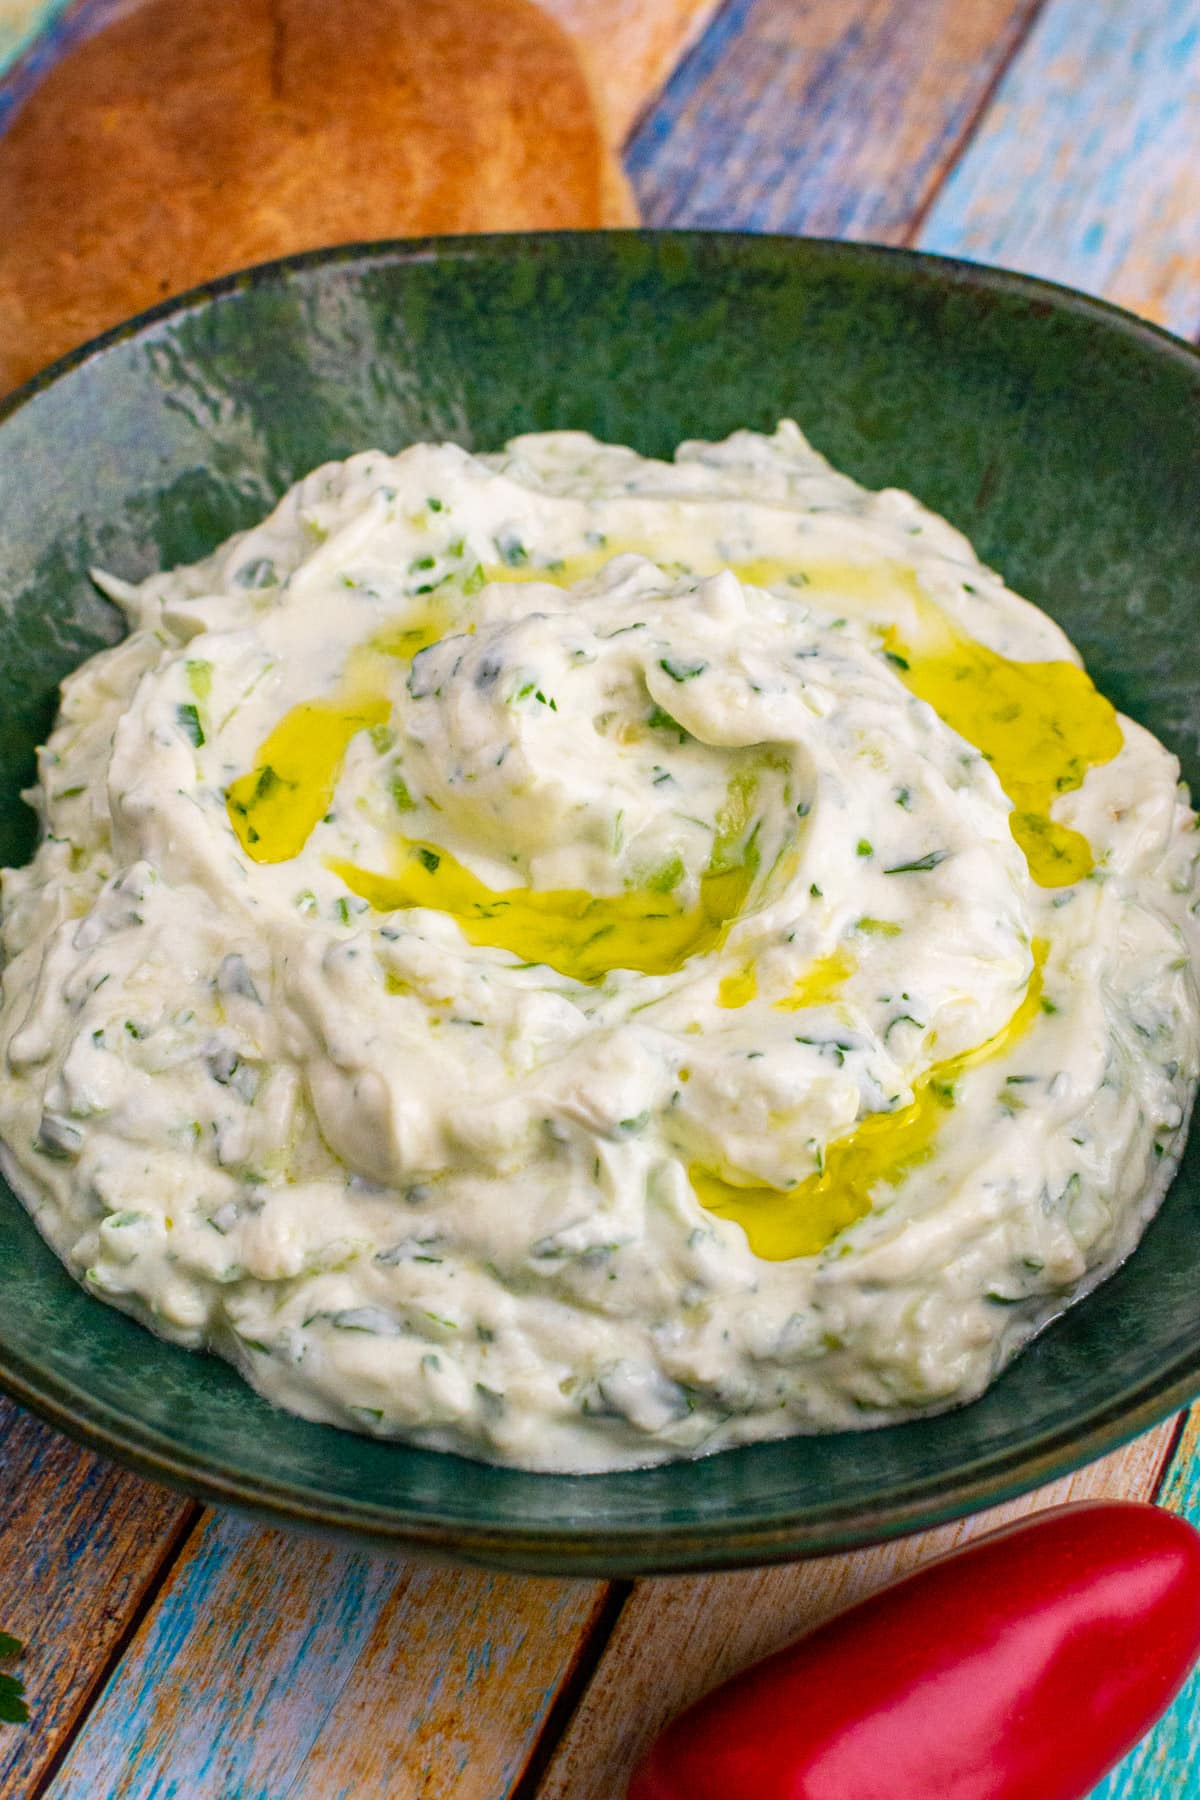 A green plate with tzatziki sauce in a green plate on a wooden table.